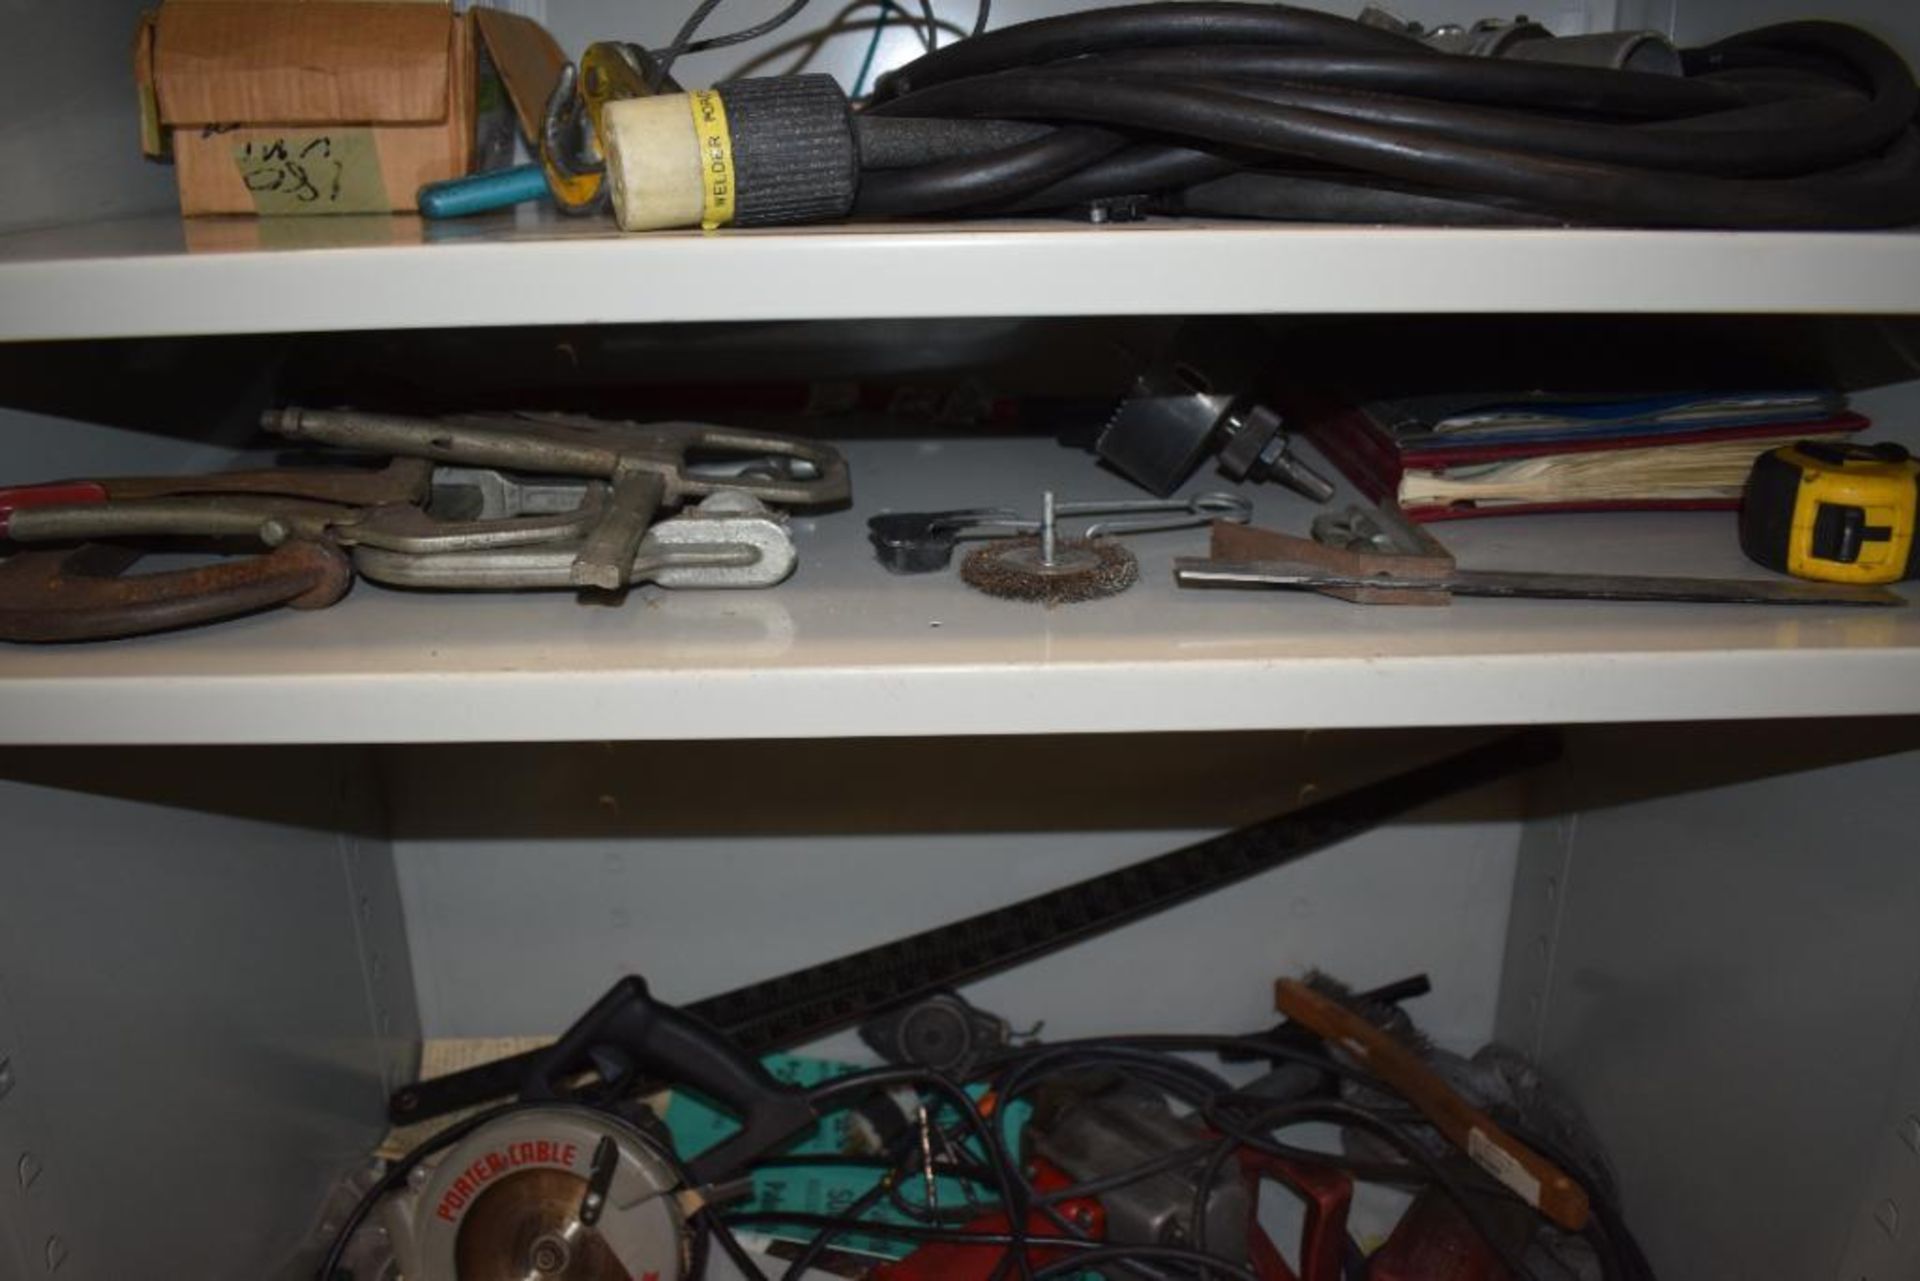 Lot Consisting Of: (1) 2 Door metal cabinets with miscellaneous tools, including saw, batteries, met - Image 4 of 10